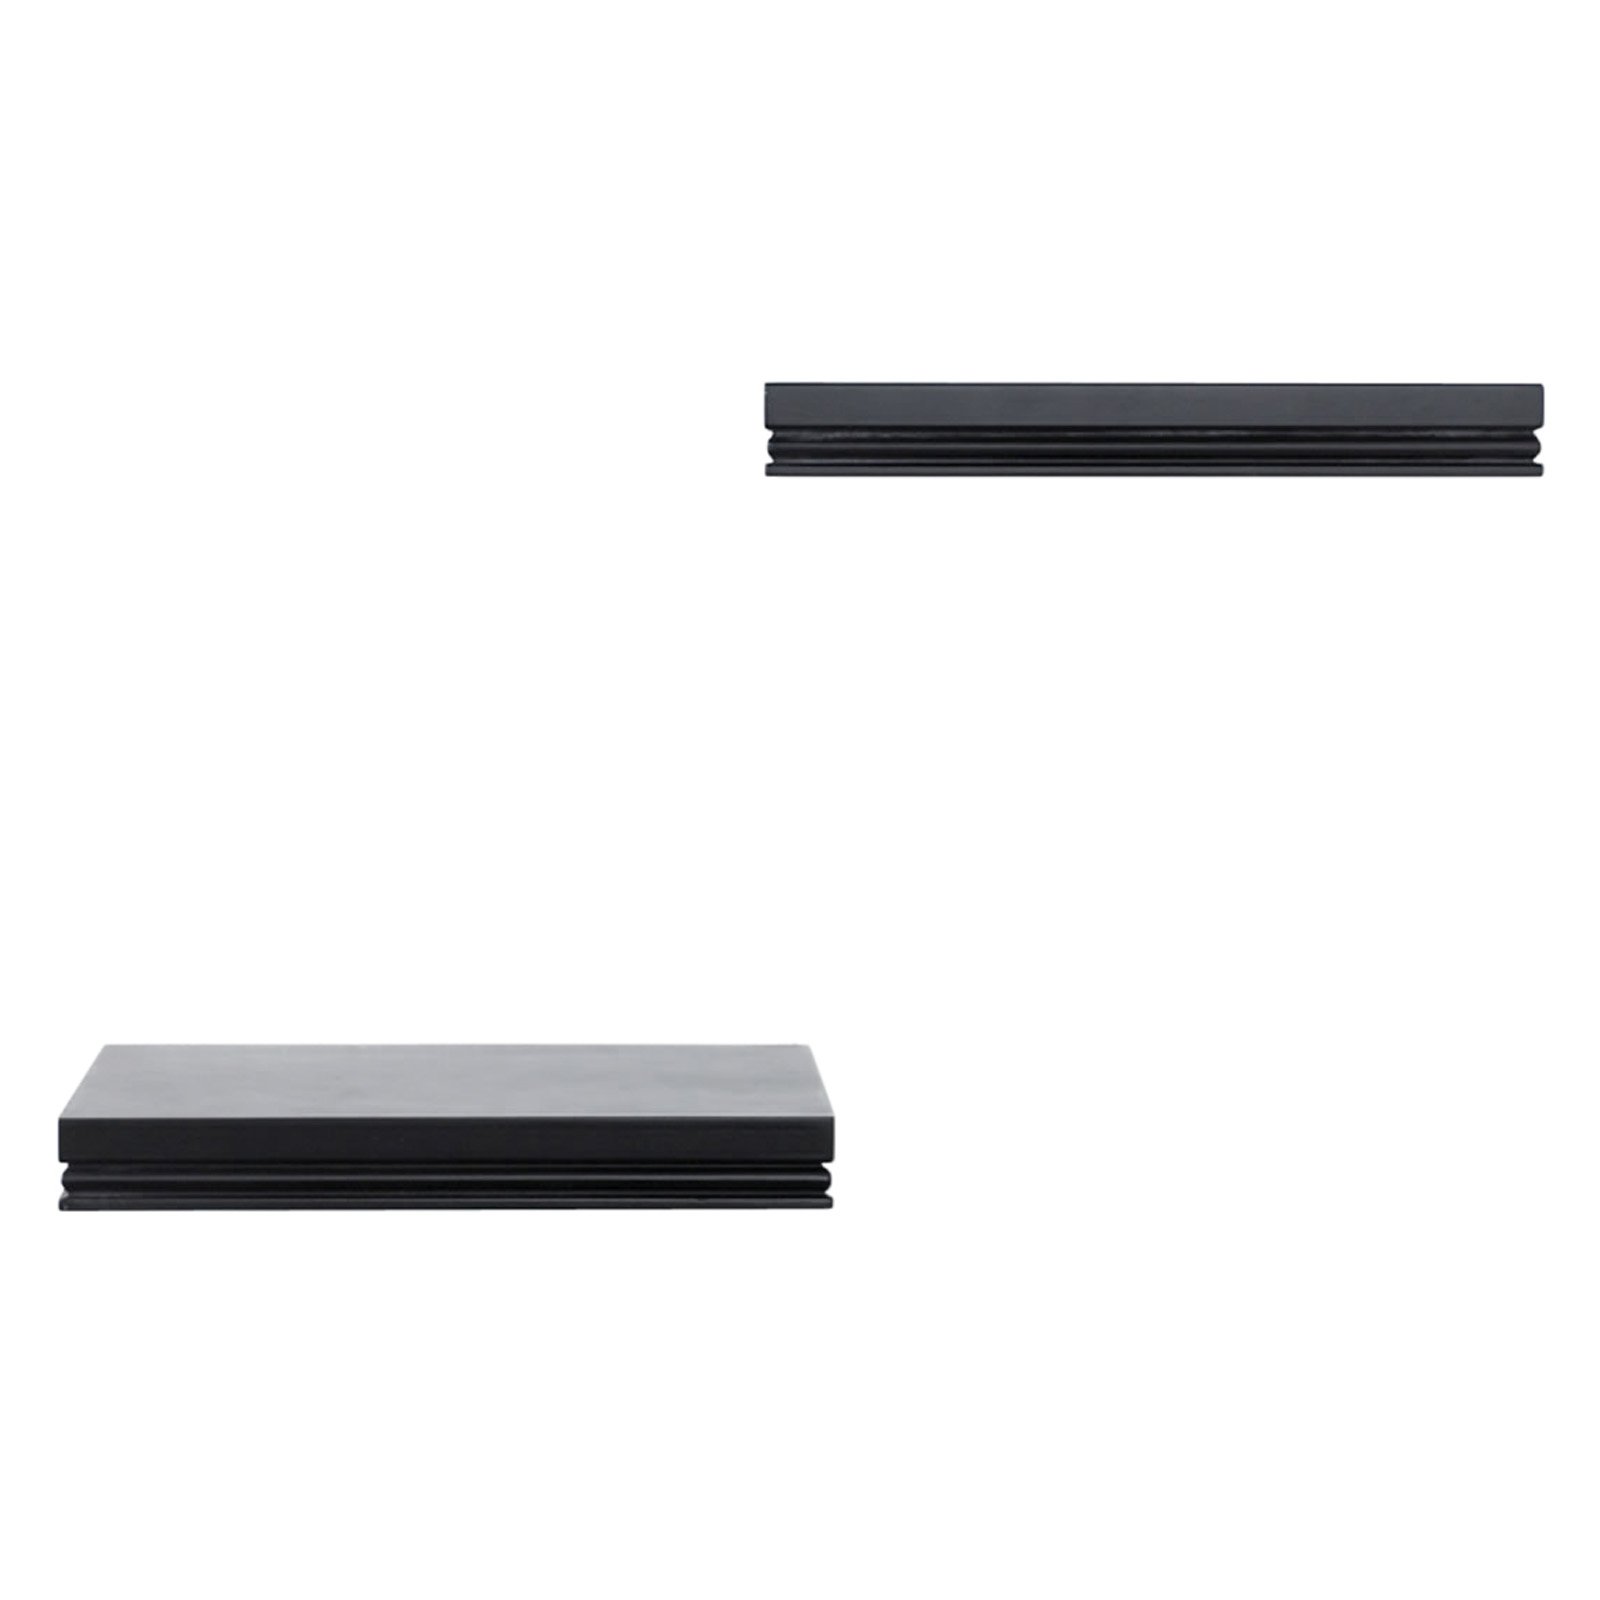 Warwick 10 in W x 8 in D x 1.25 in H Floating Wall Shelves, Set of 2, Black - image 3 of 4